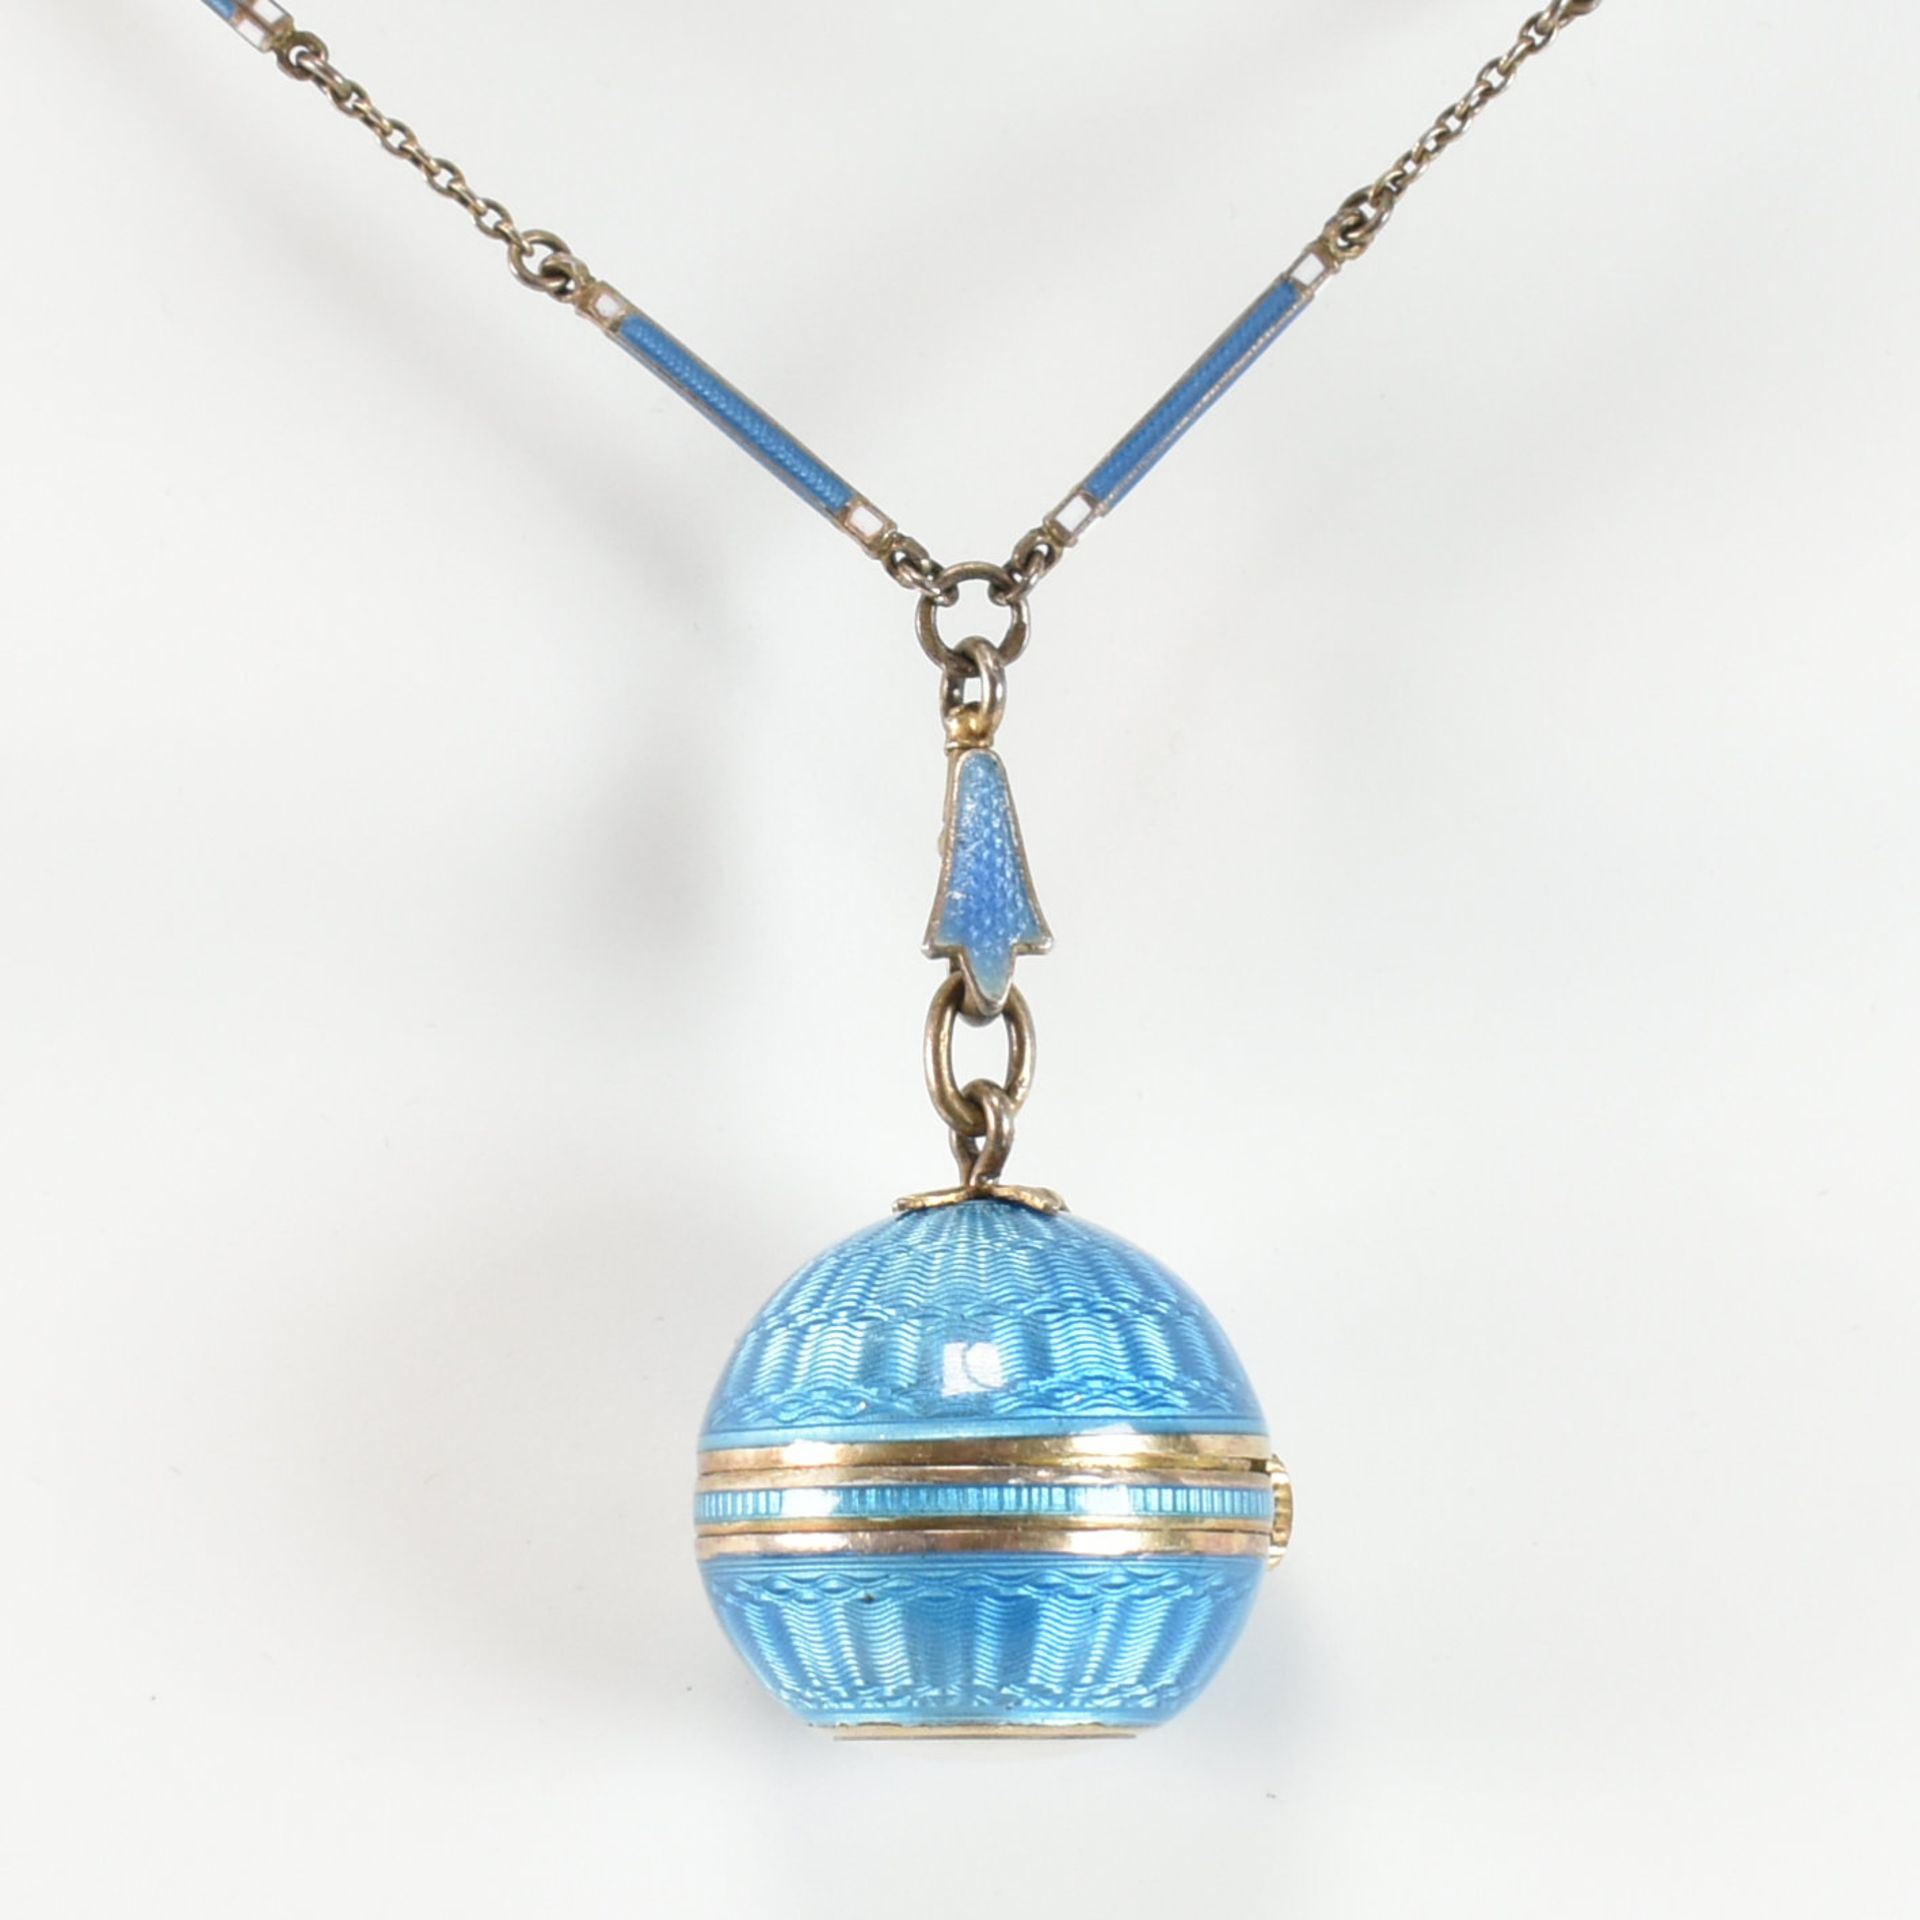 EARLY 20TH CENTURY SWISS SILVER ENAMEL BALL WATCH & CHAIN - Image 13 of 13